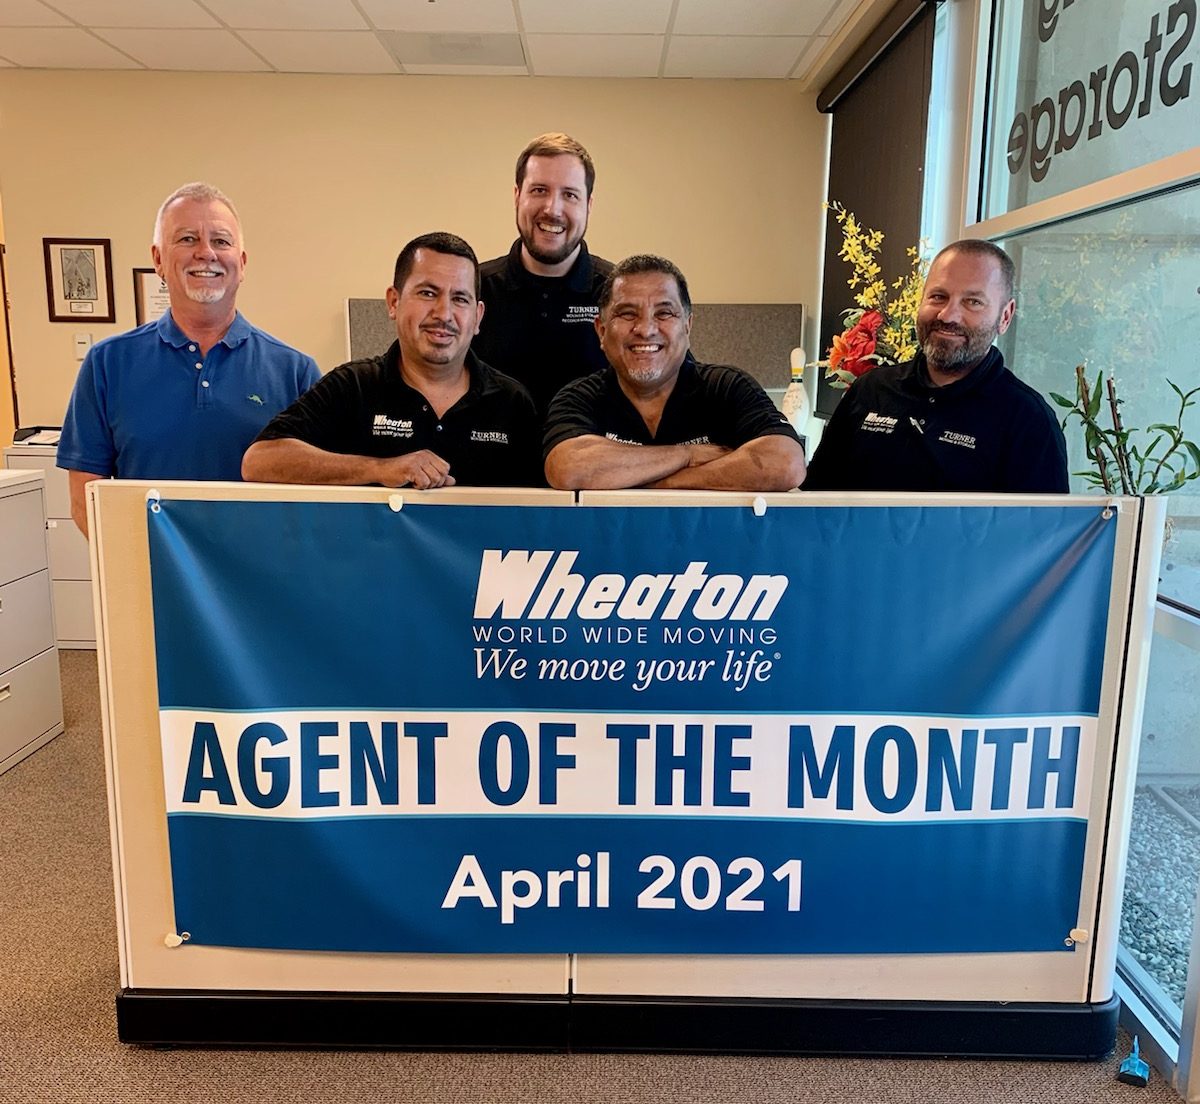 We are proud to be Wheaton World Wide Moving's Agent of the Month for April 2021!